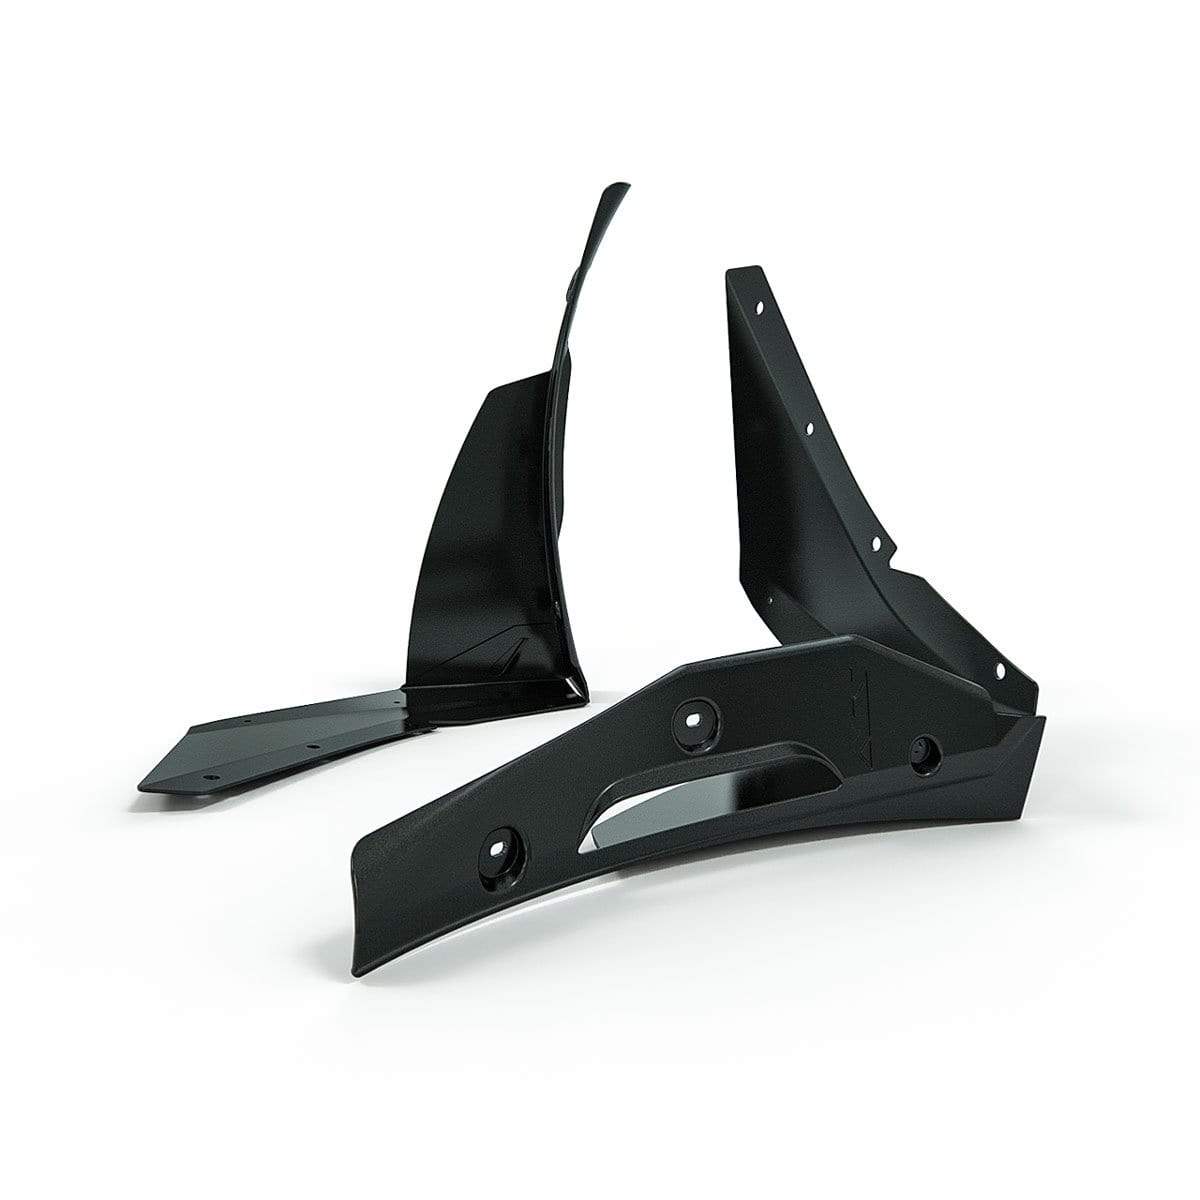 ACS Stage 3 Deflectors for Camaro SS, SKU 48-4-035, designed for enhanced aerodynamics and cooling with ACS ZL1-SS front splitter.